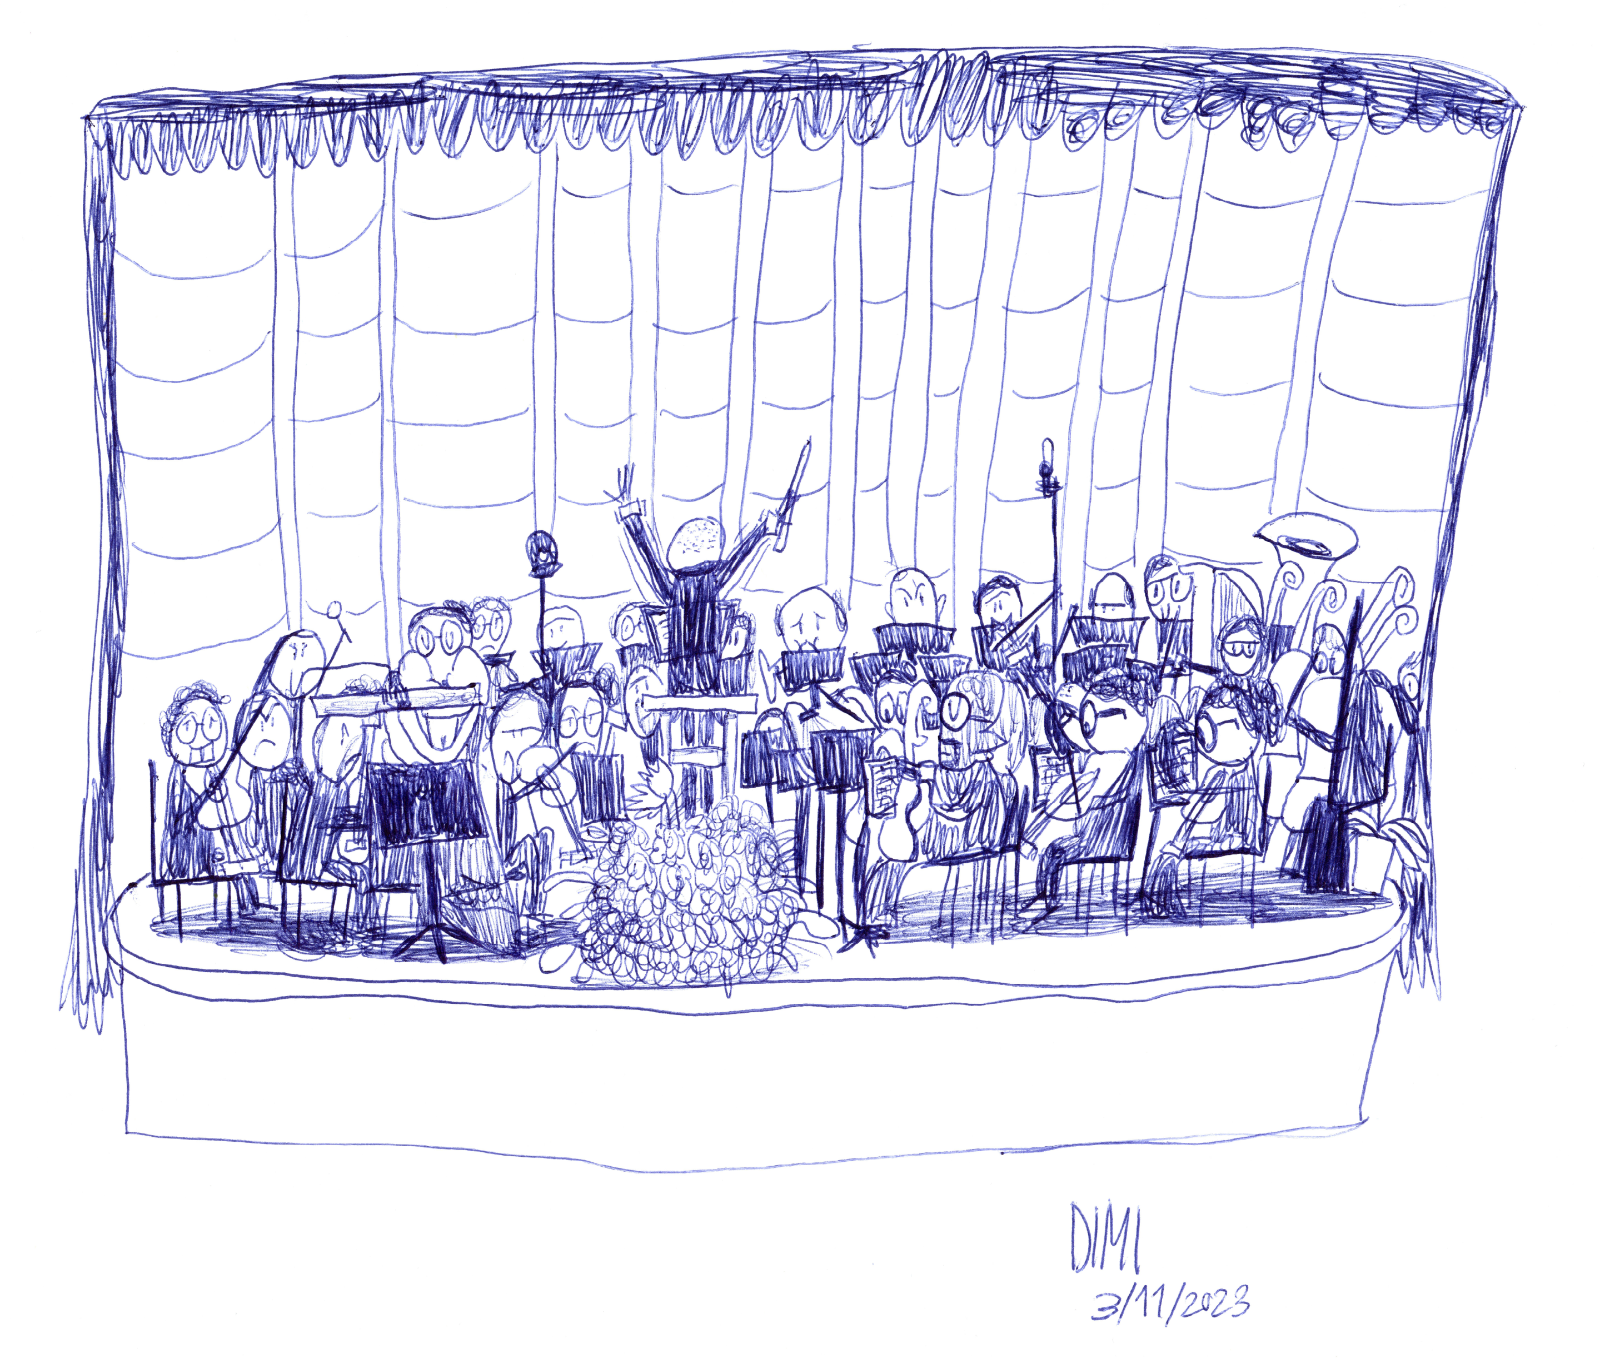 Ink pen drawing of an orchestra performing music